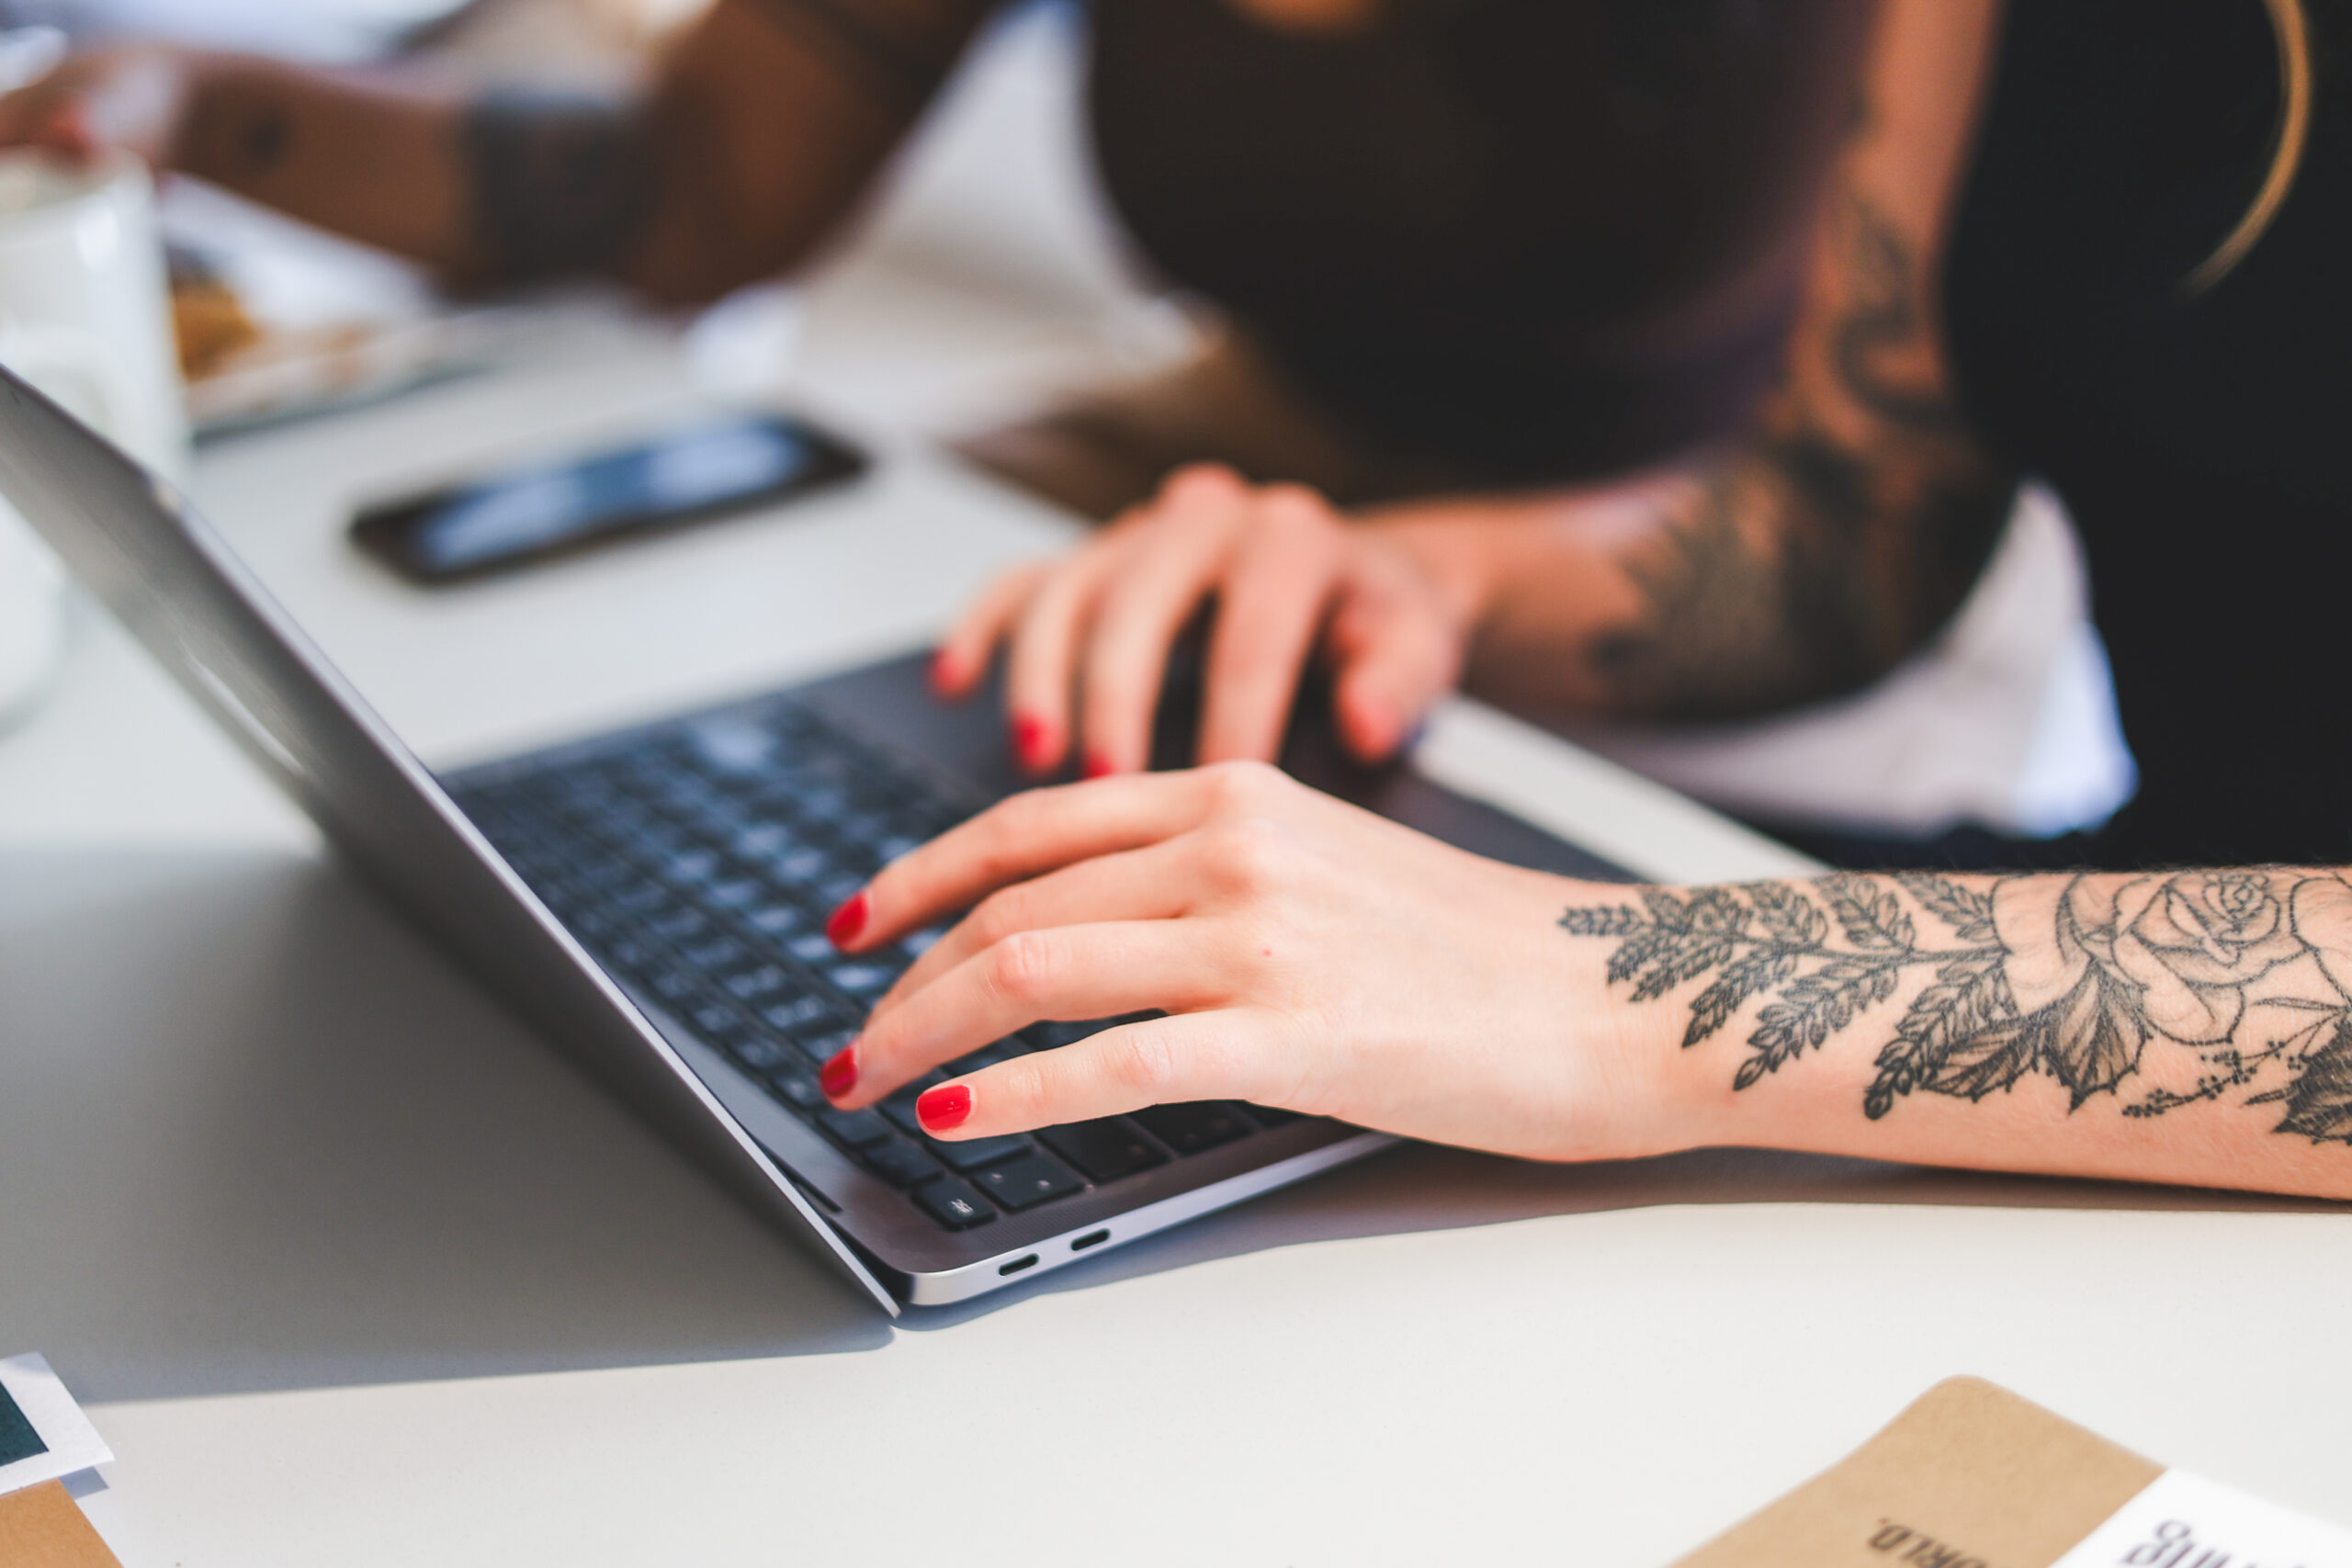 A cropped photograph of a woman working on a laptop computer. She has tattoos on both of her arms